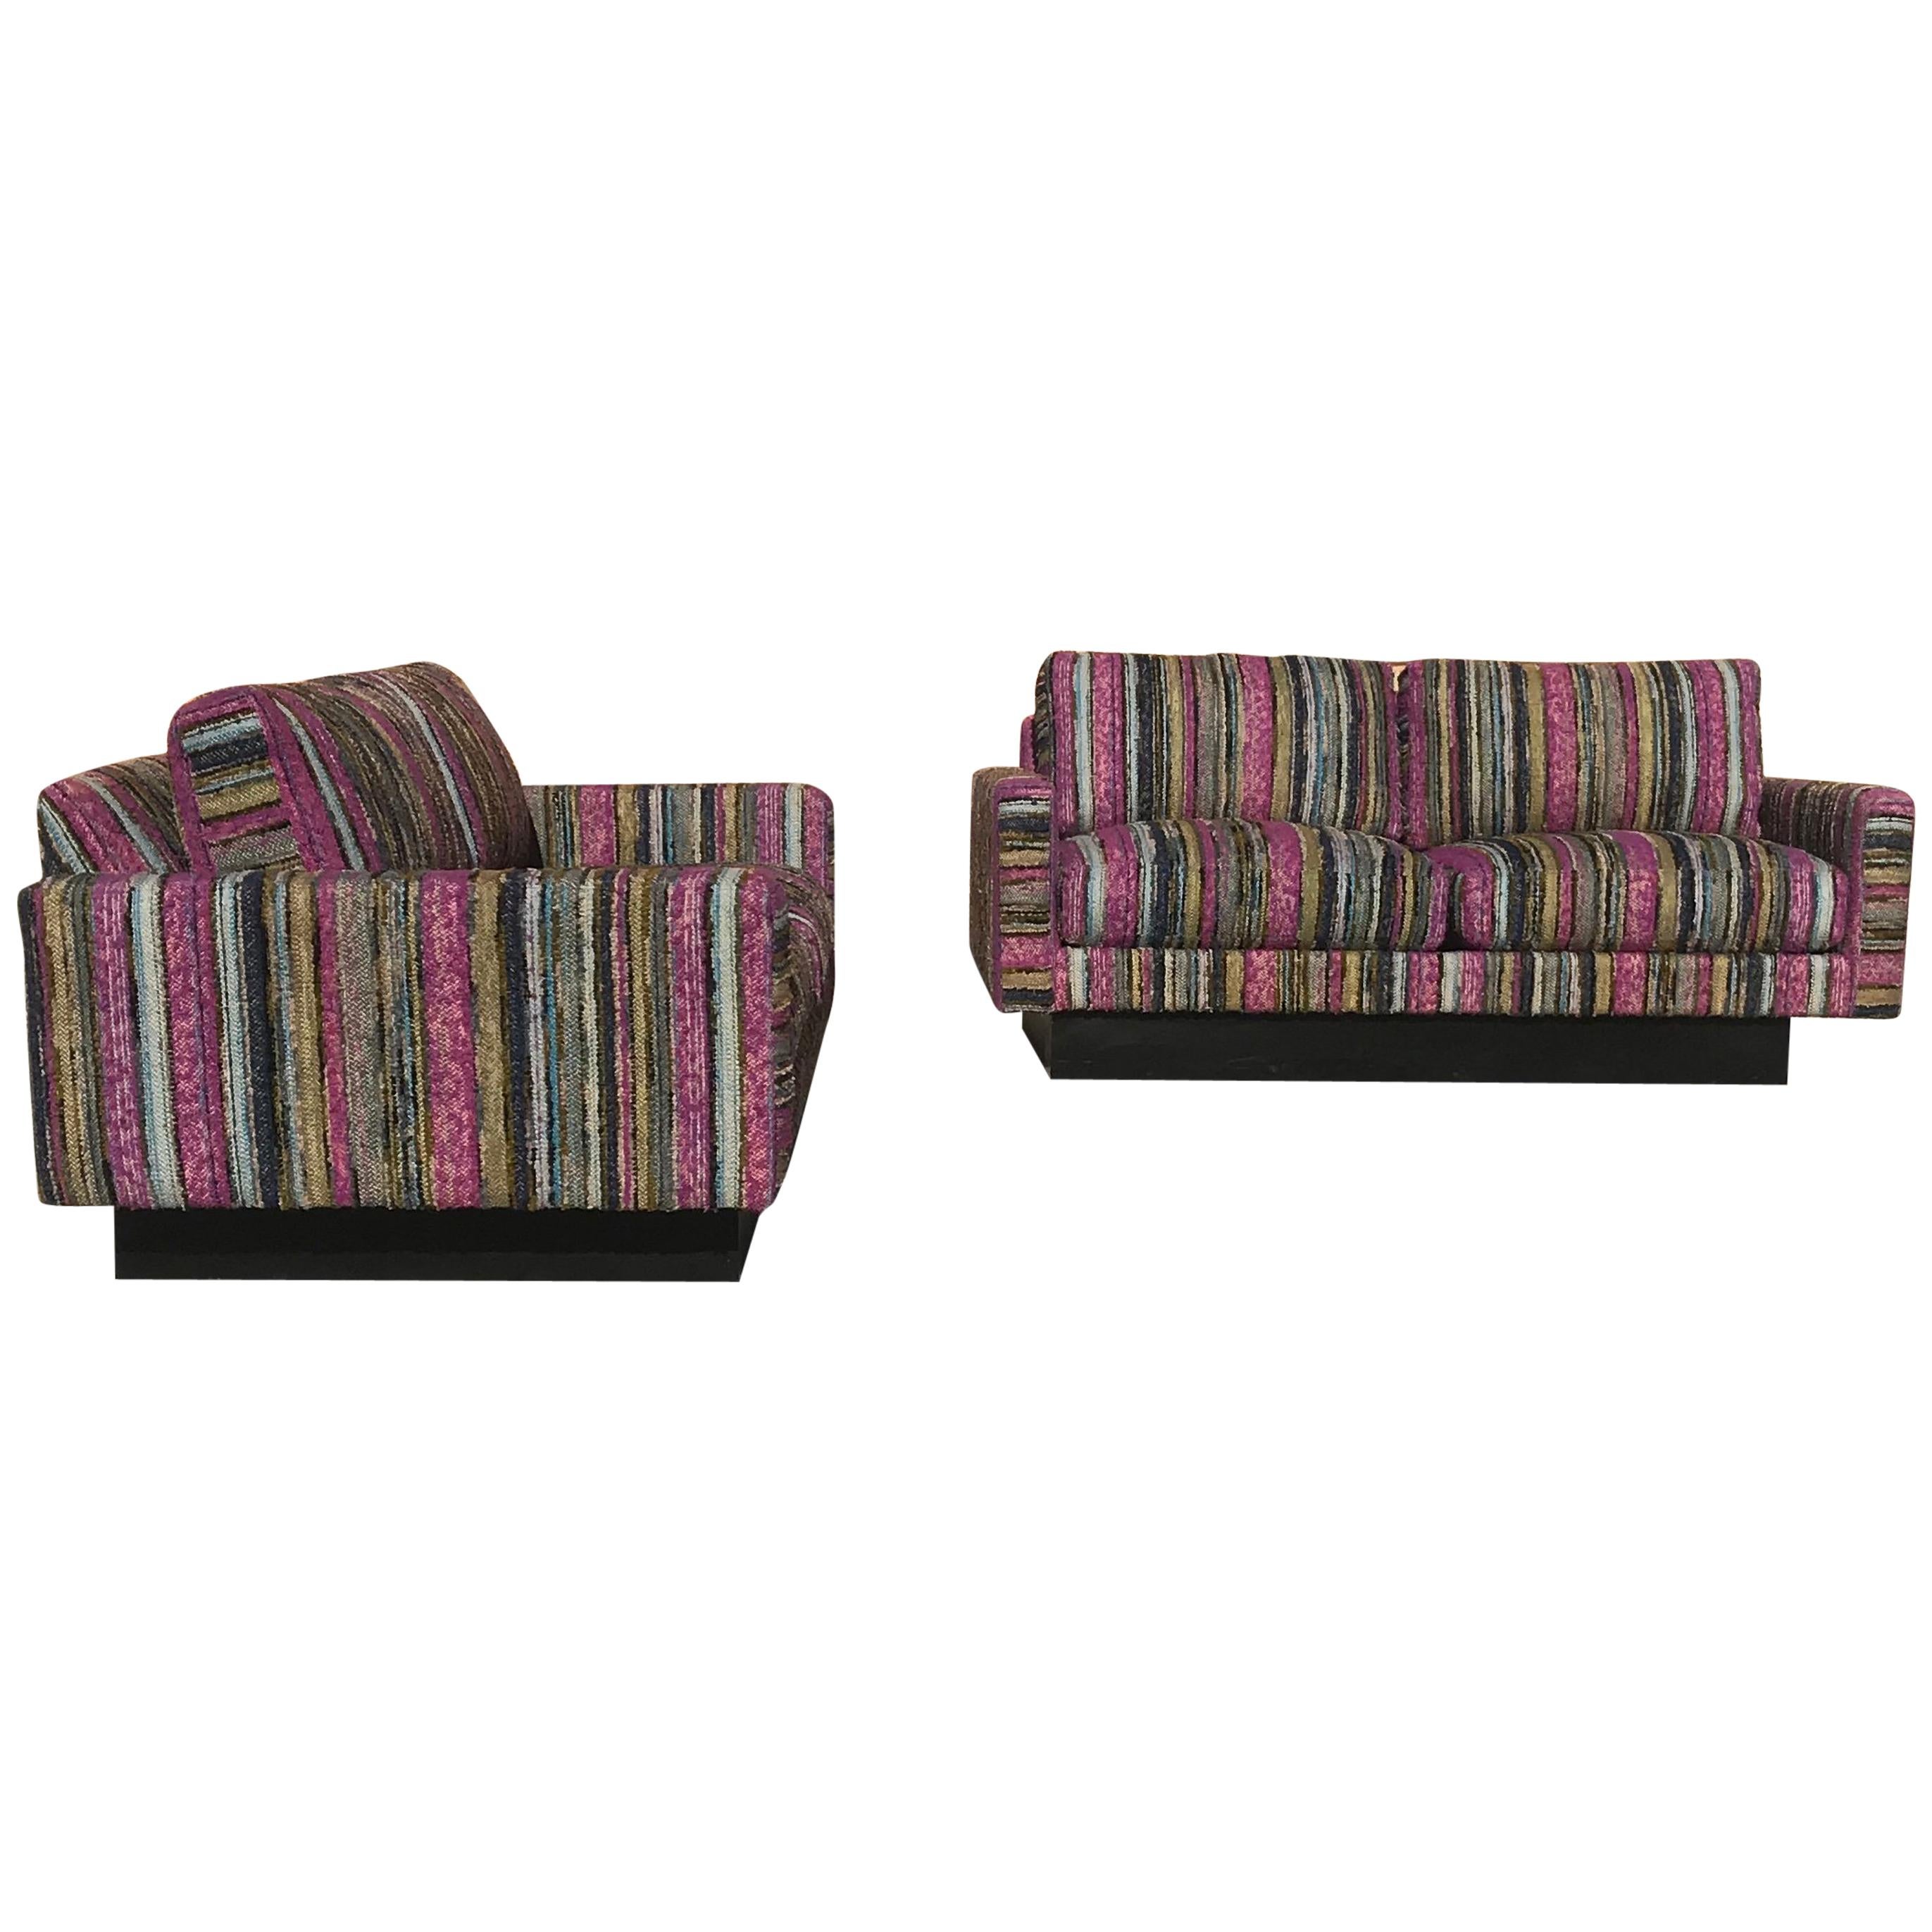 Matched Pair Milo Baughman for Selig Setee's.Missoni Fabric